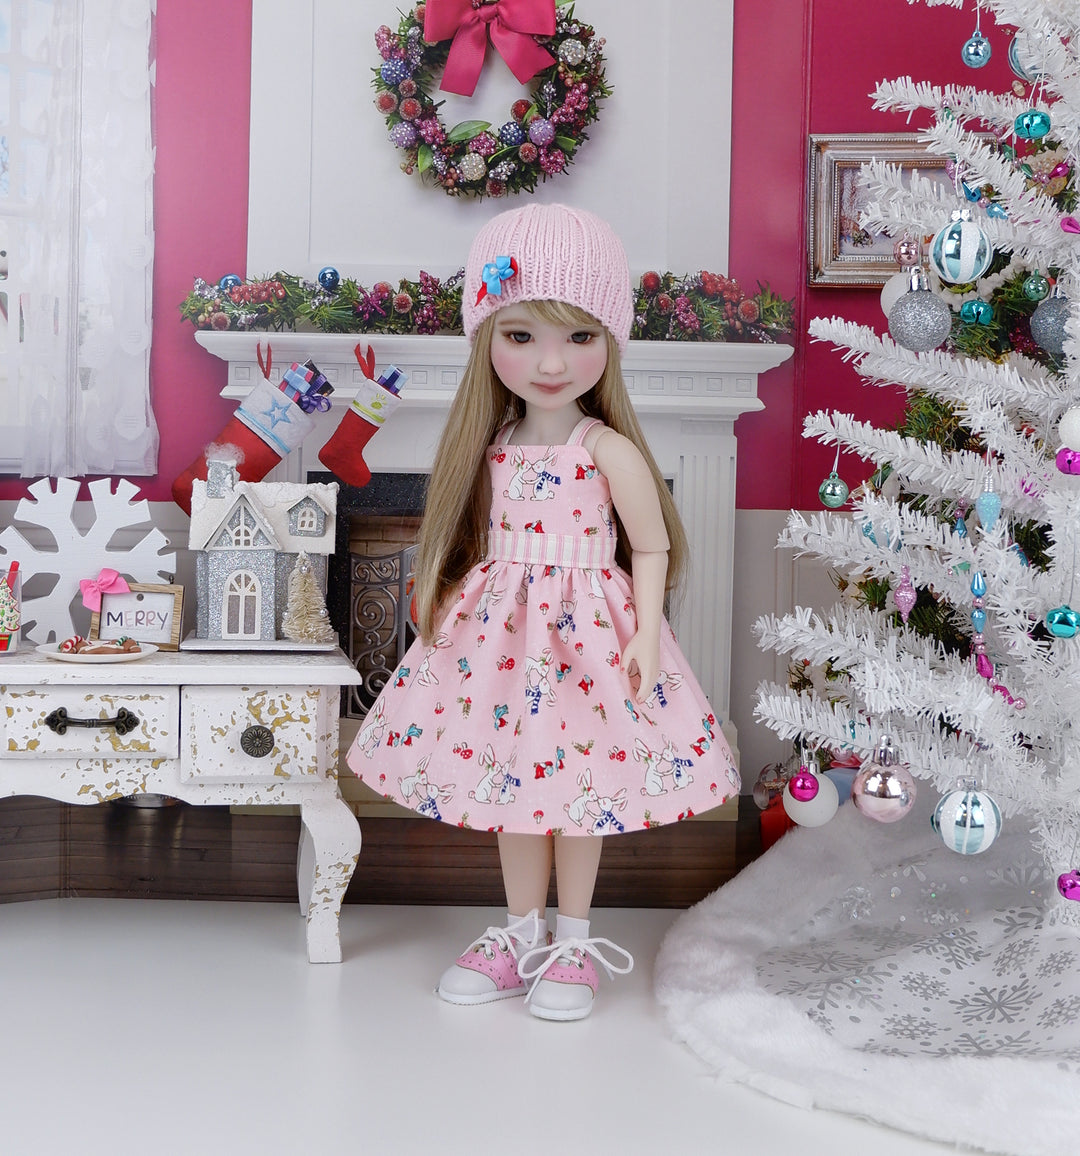 Winter Bunnies - dress and sweater with purse & saddle shoes for Ruby Red Fashion Friends doll